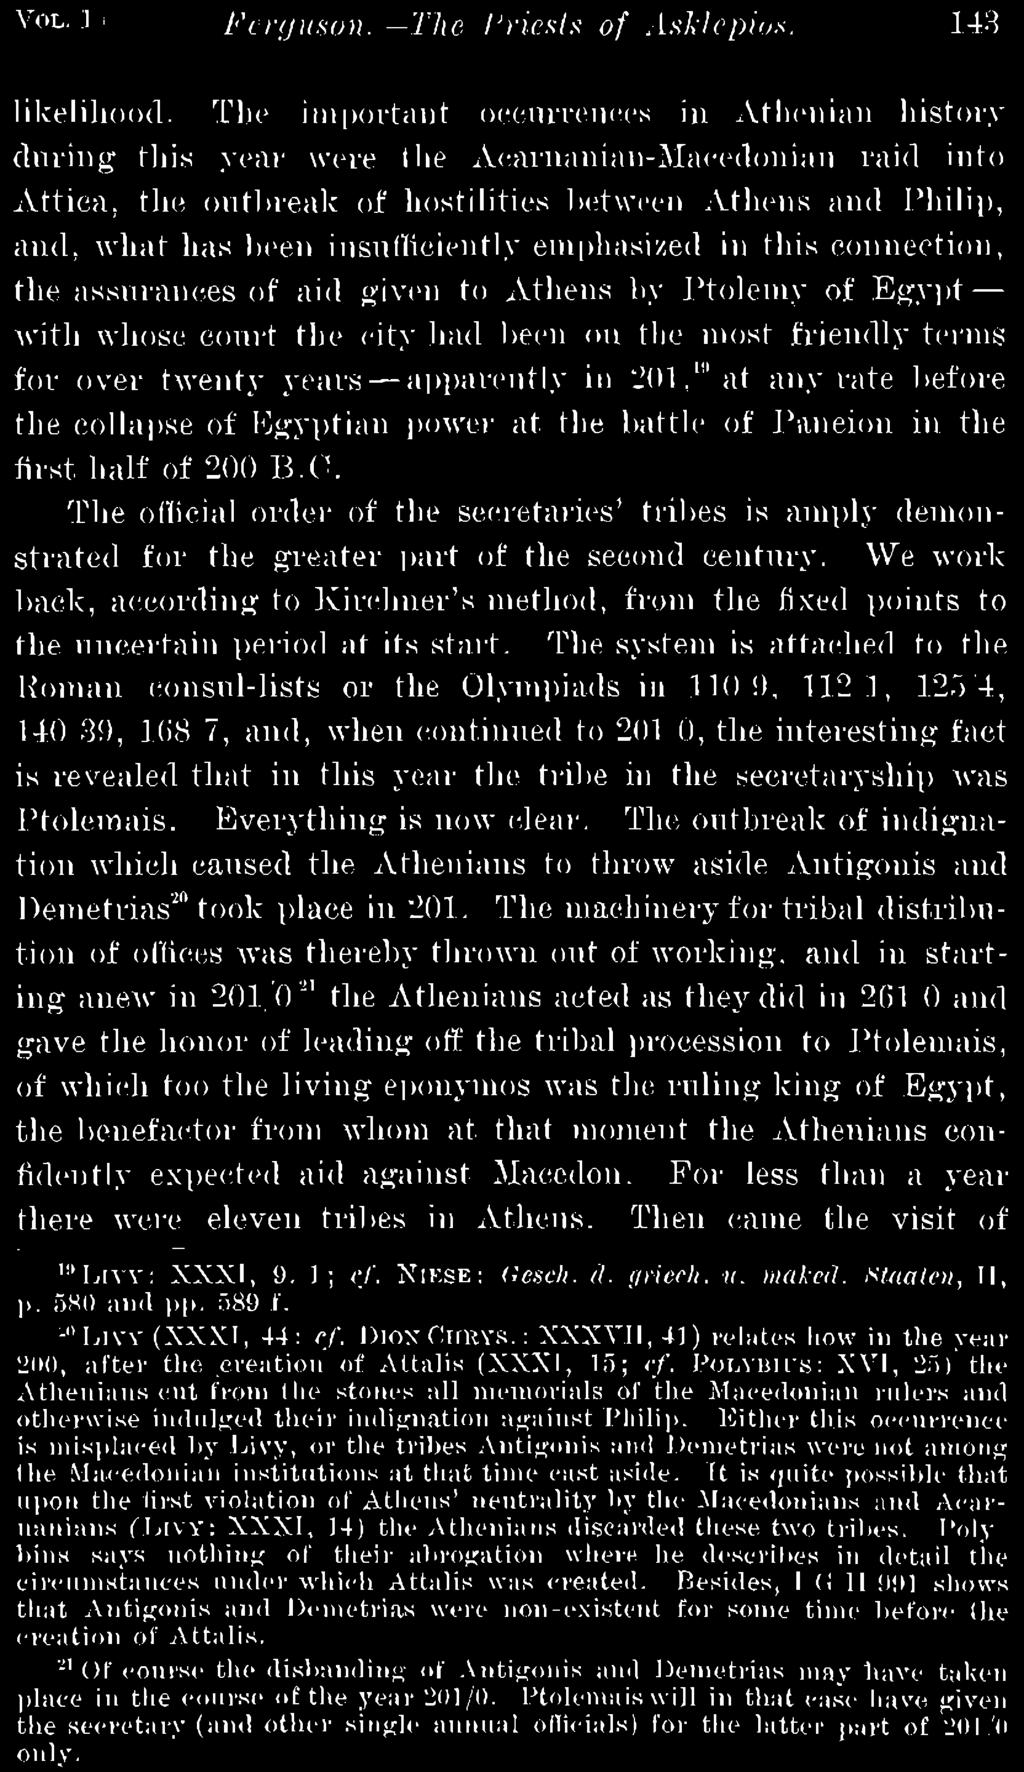 ), 112 1, 125 4, 140 39, 168 7, and, when continued to 201 0, the interesting fact is revealed that in this year the tribe in the secretaryship was Ptolemais. Everything is now clear.